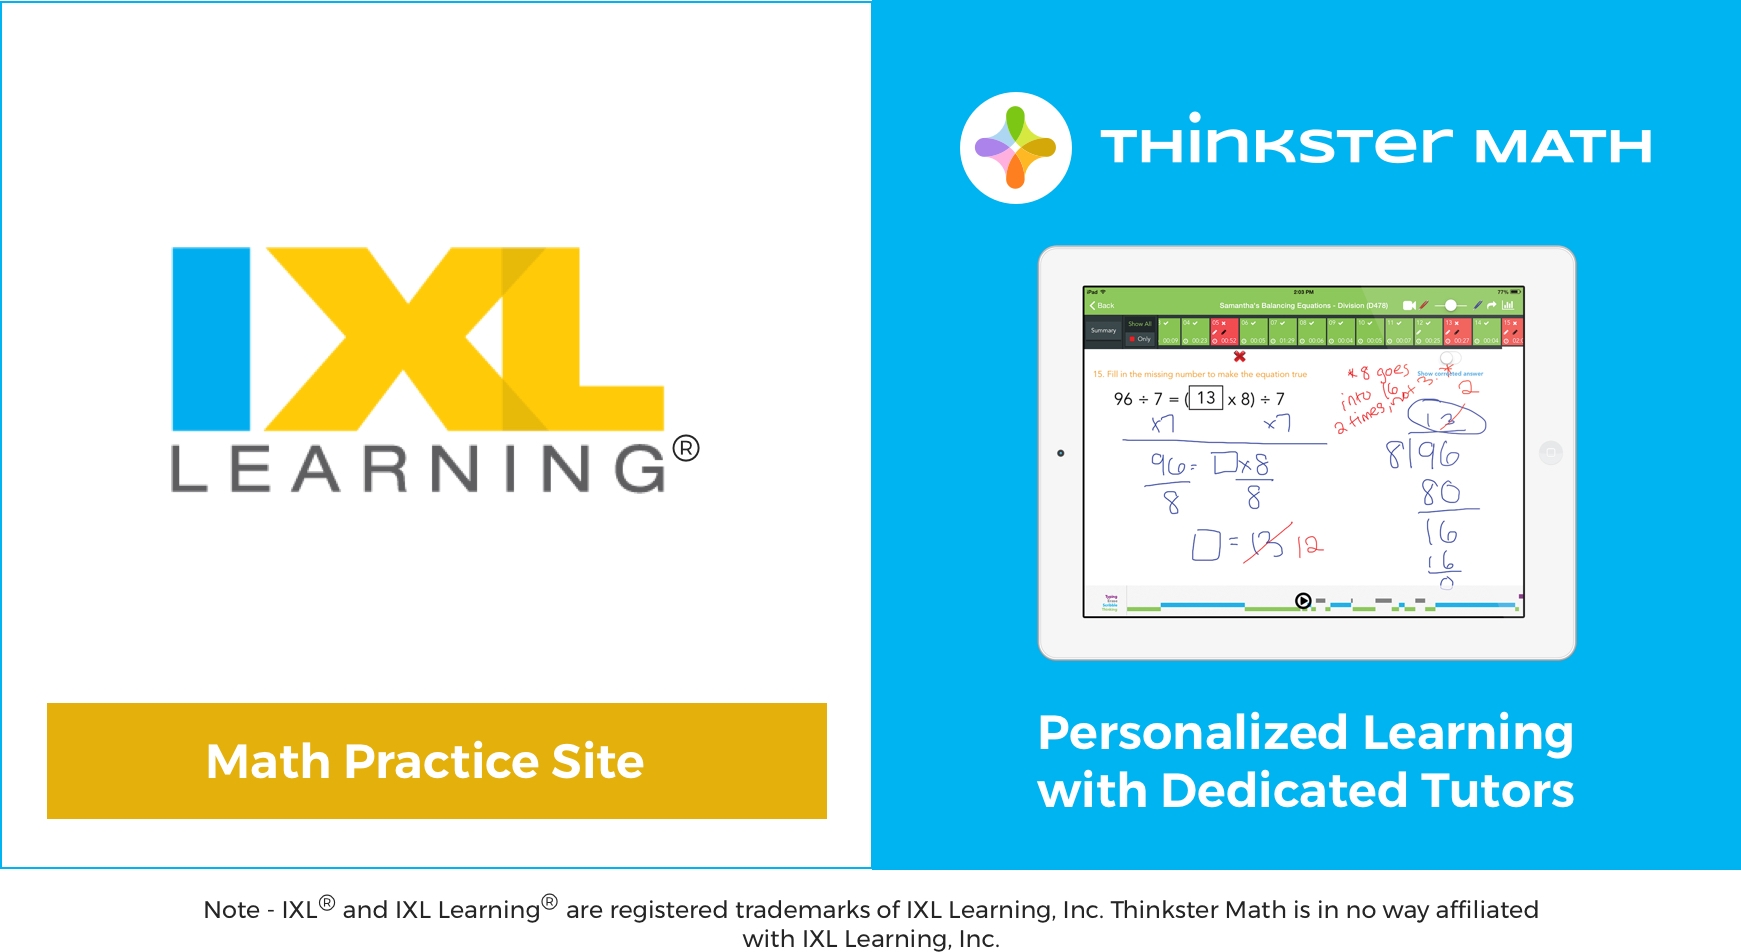 How Does The Ixl Math Program Compare To Thinkster Math?